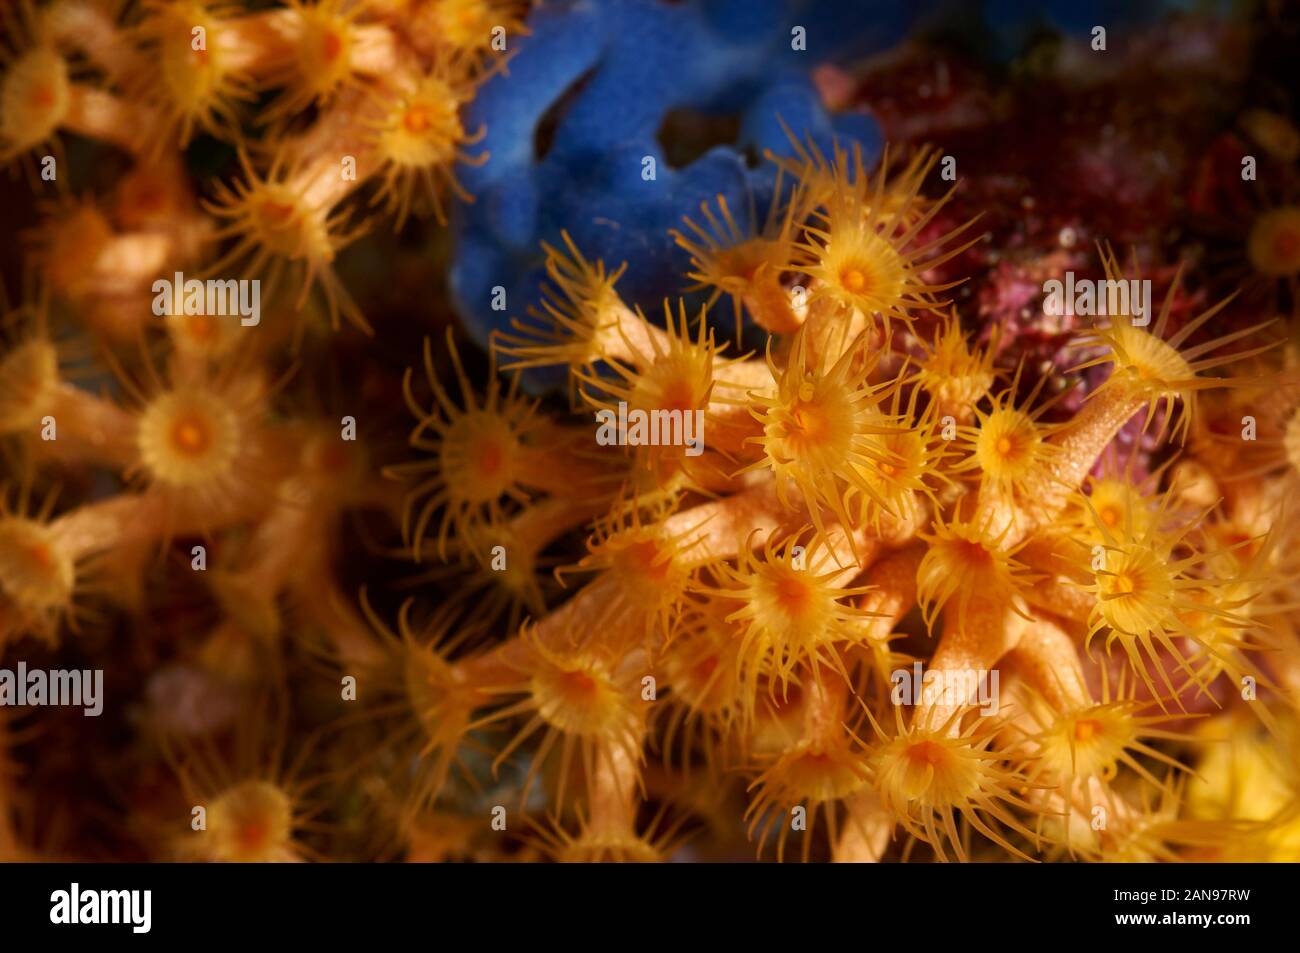 Yellow cluster anemone (Parazoanthus axinellae) close-up in Ses Salines Natural Park (Formentera, Pityuses, Balearic Islands, Mediterranean Sea,Spain) Stock Photo